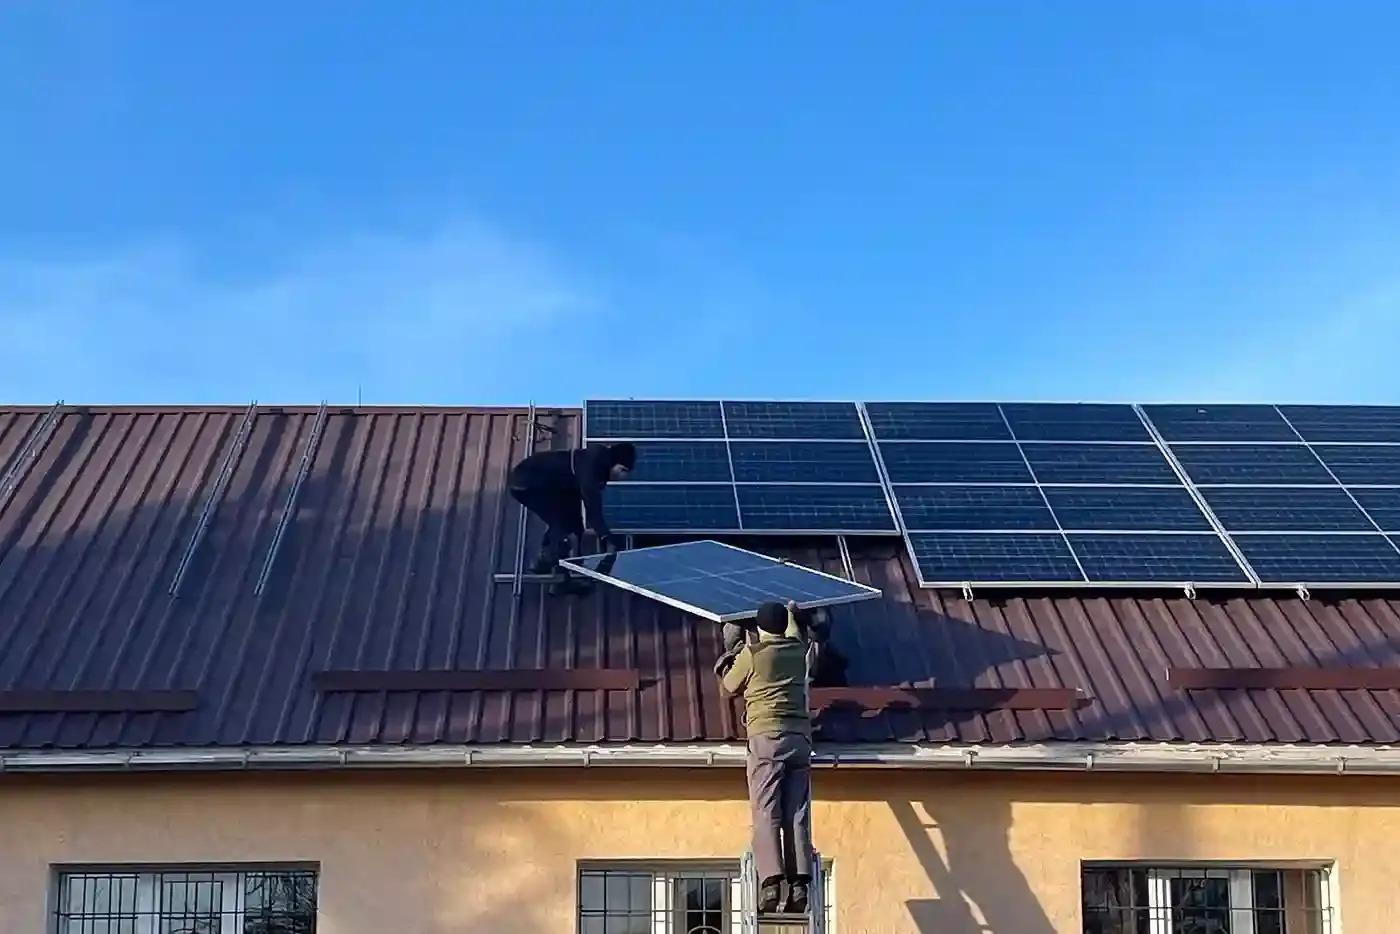 Solar panels being installed on a rooftop